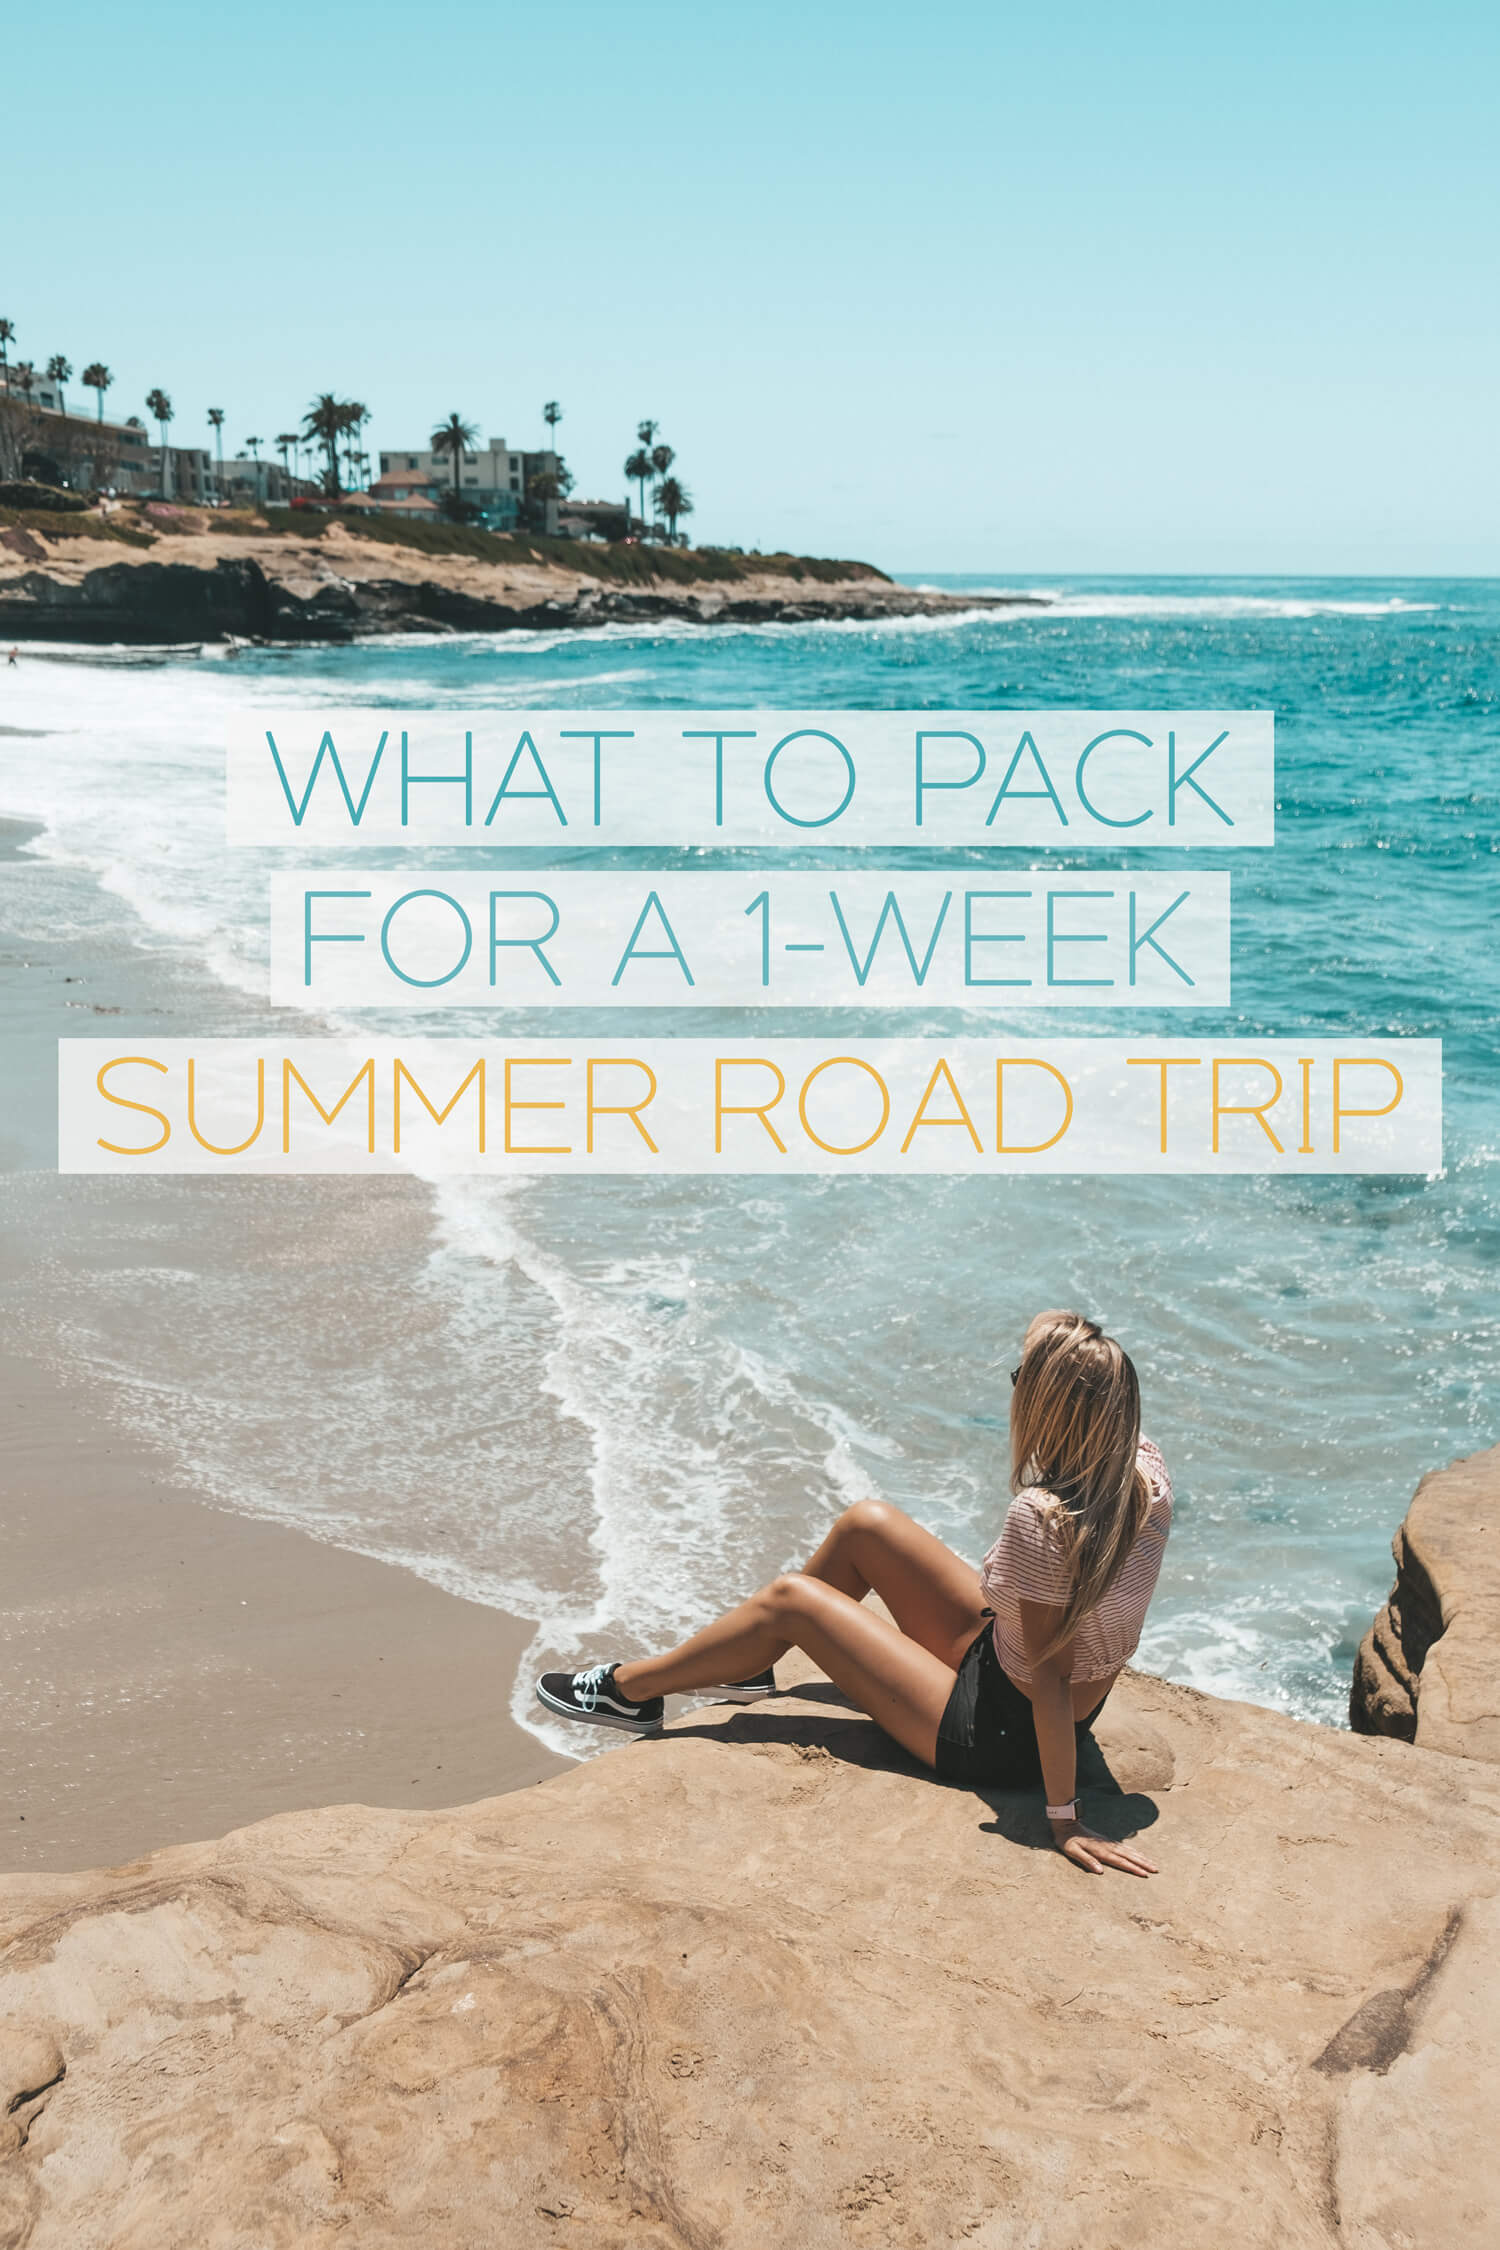 What to Pack for a Summer Road Trip